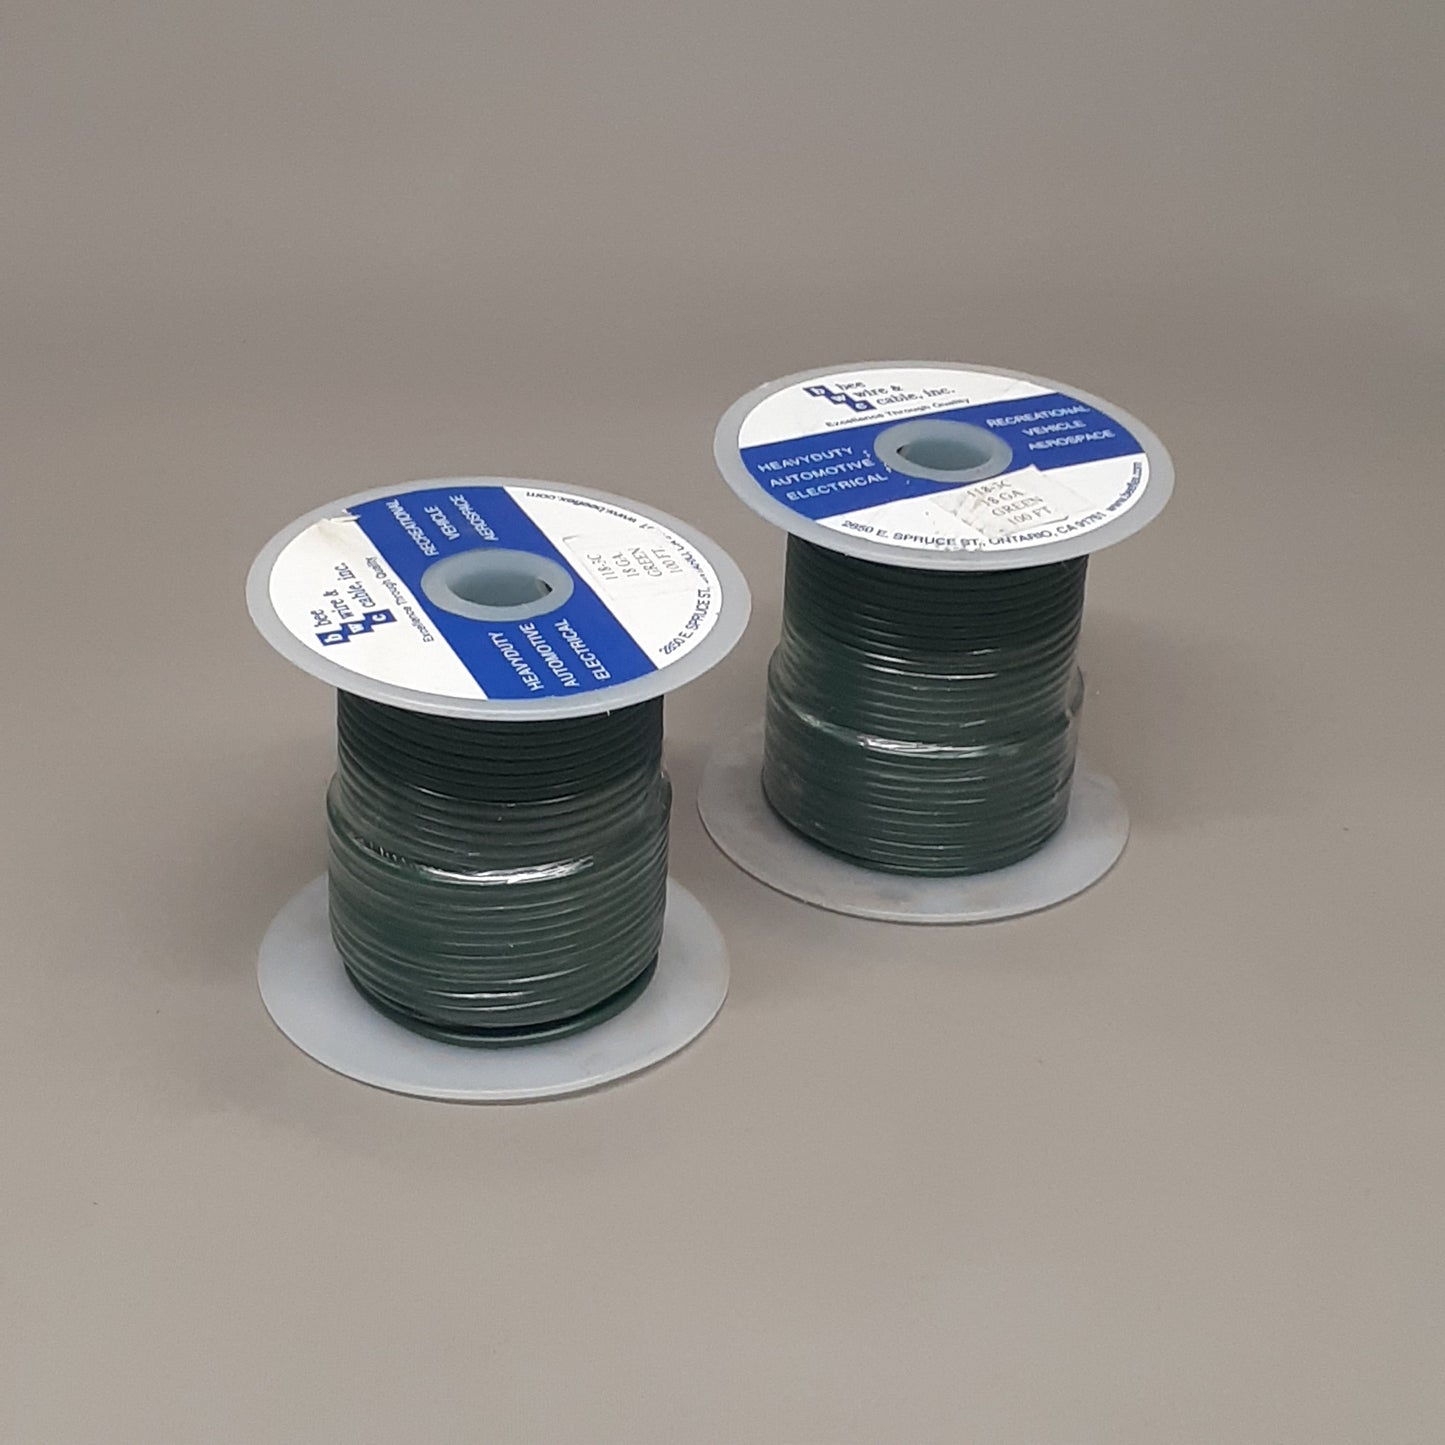 BEE WIRE & CABLE INC. 2-Pack! 100' Heavy Duty Green Cable 118-3A (New)